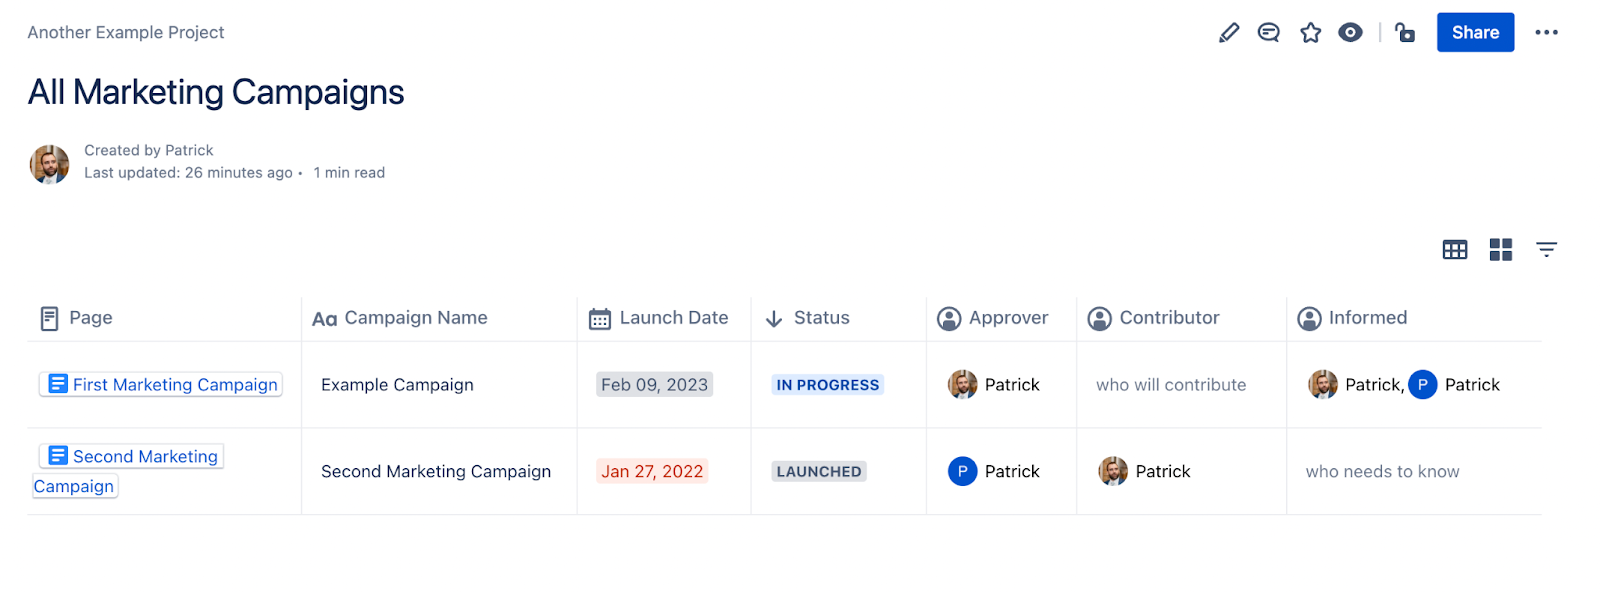 New Properties features at the end of 2022 - Property Group Report page with different items that have different statuses with different colors and in uppercase